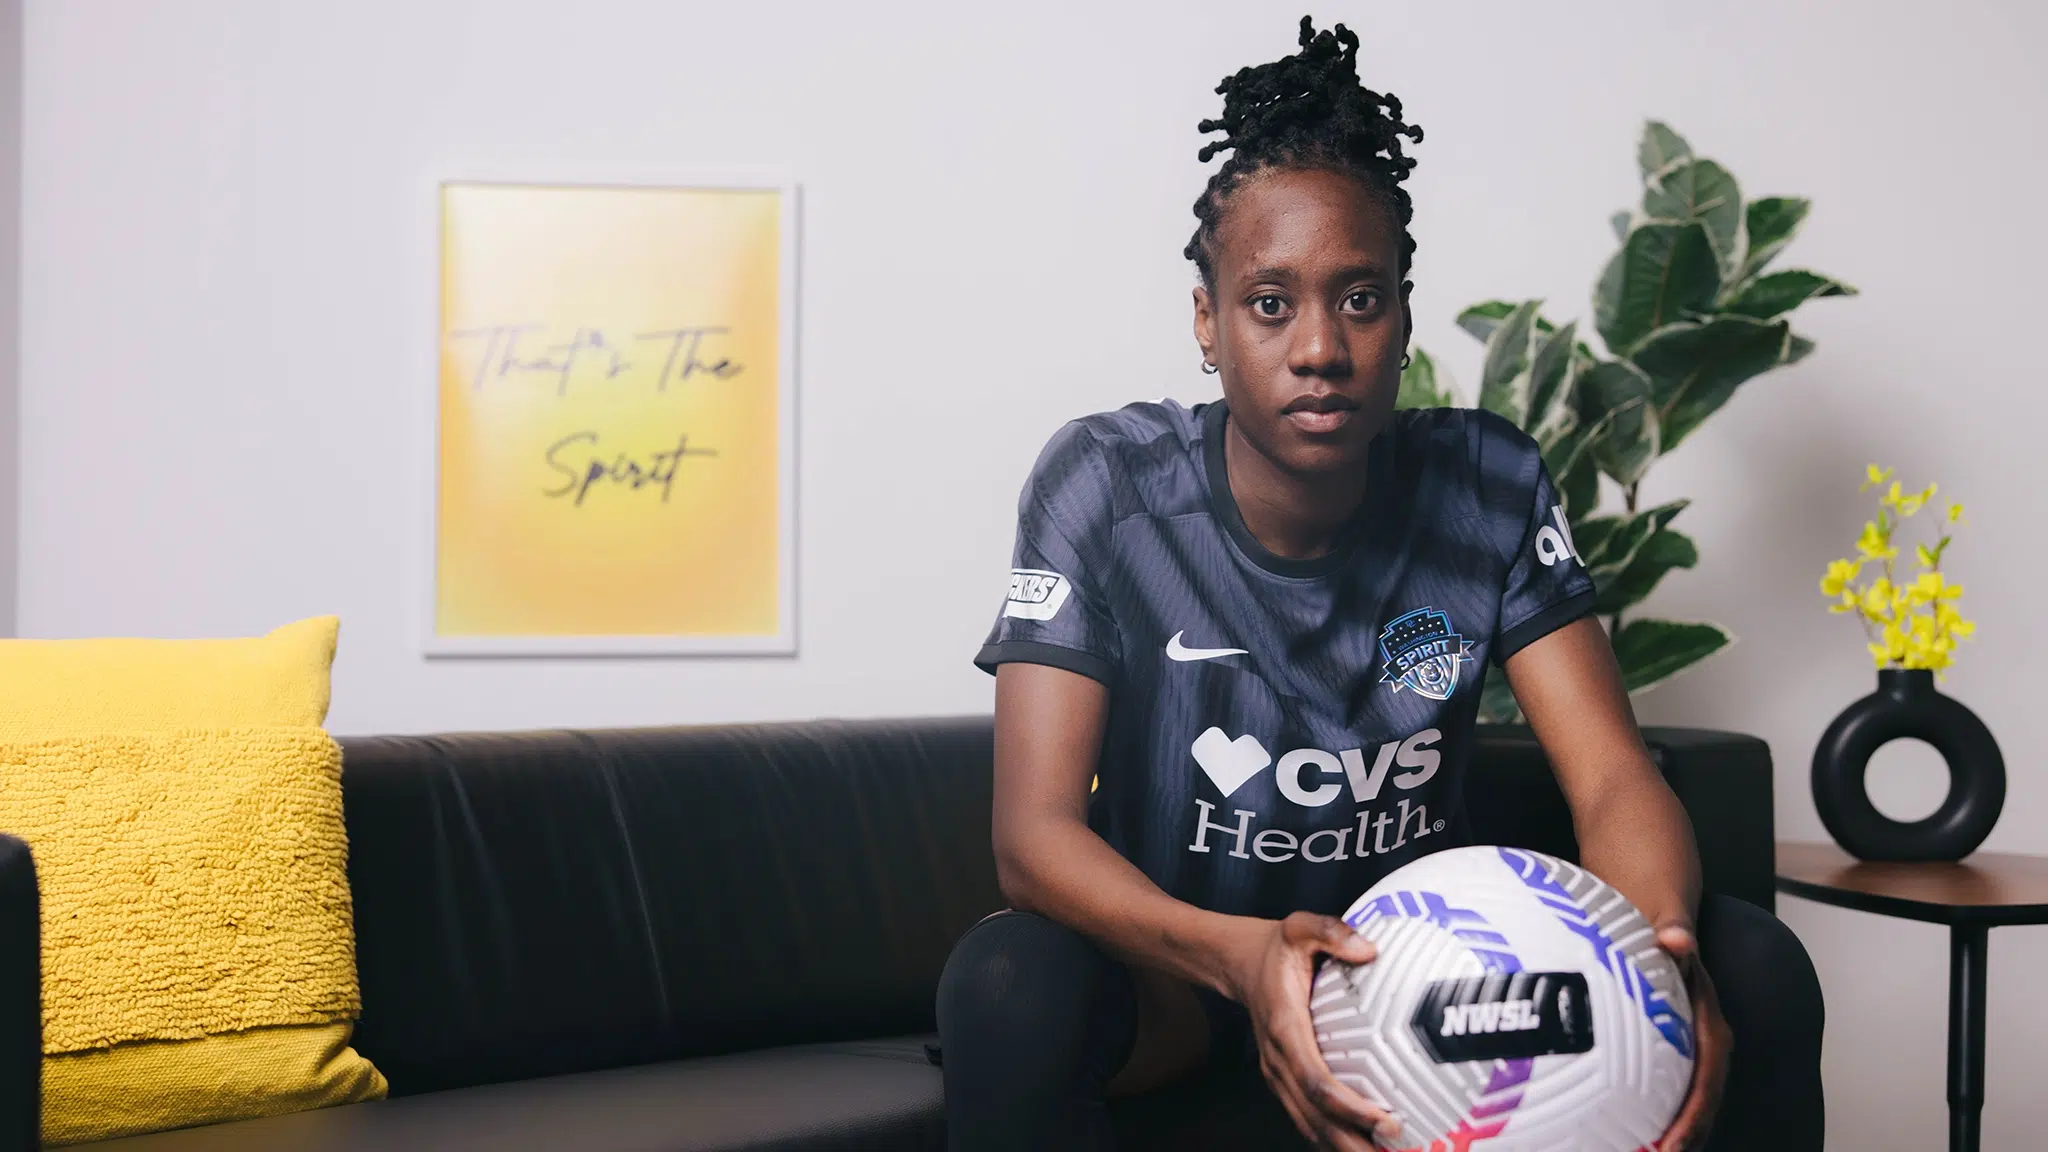 Ouelye Sarr in a black Spirit cake while sitting on a couch holding a soccer ball.